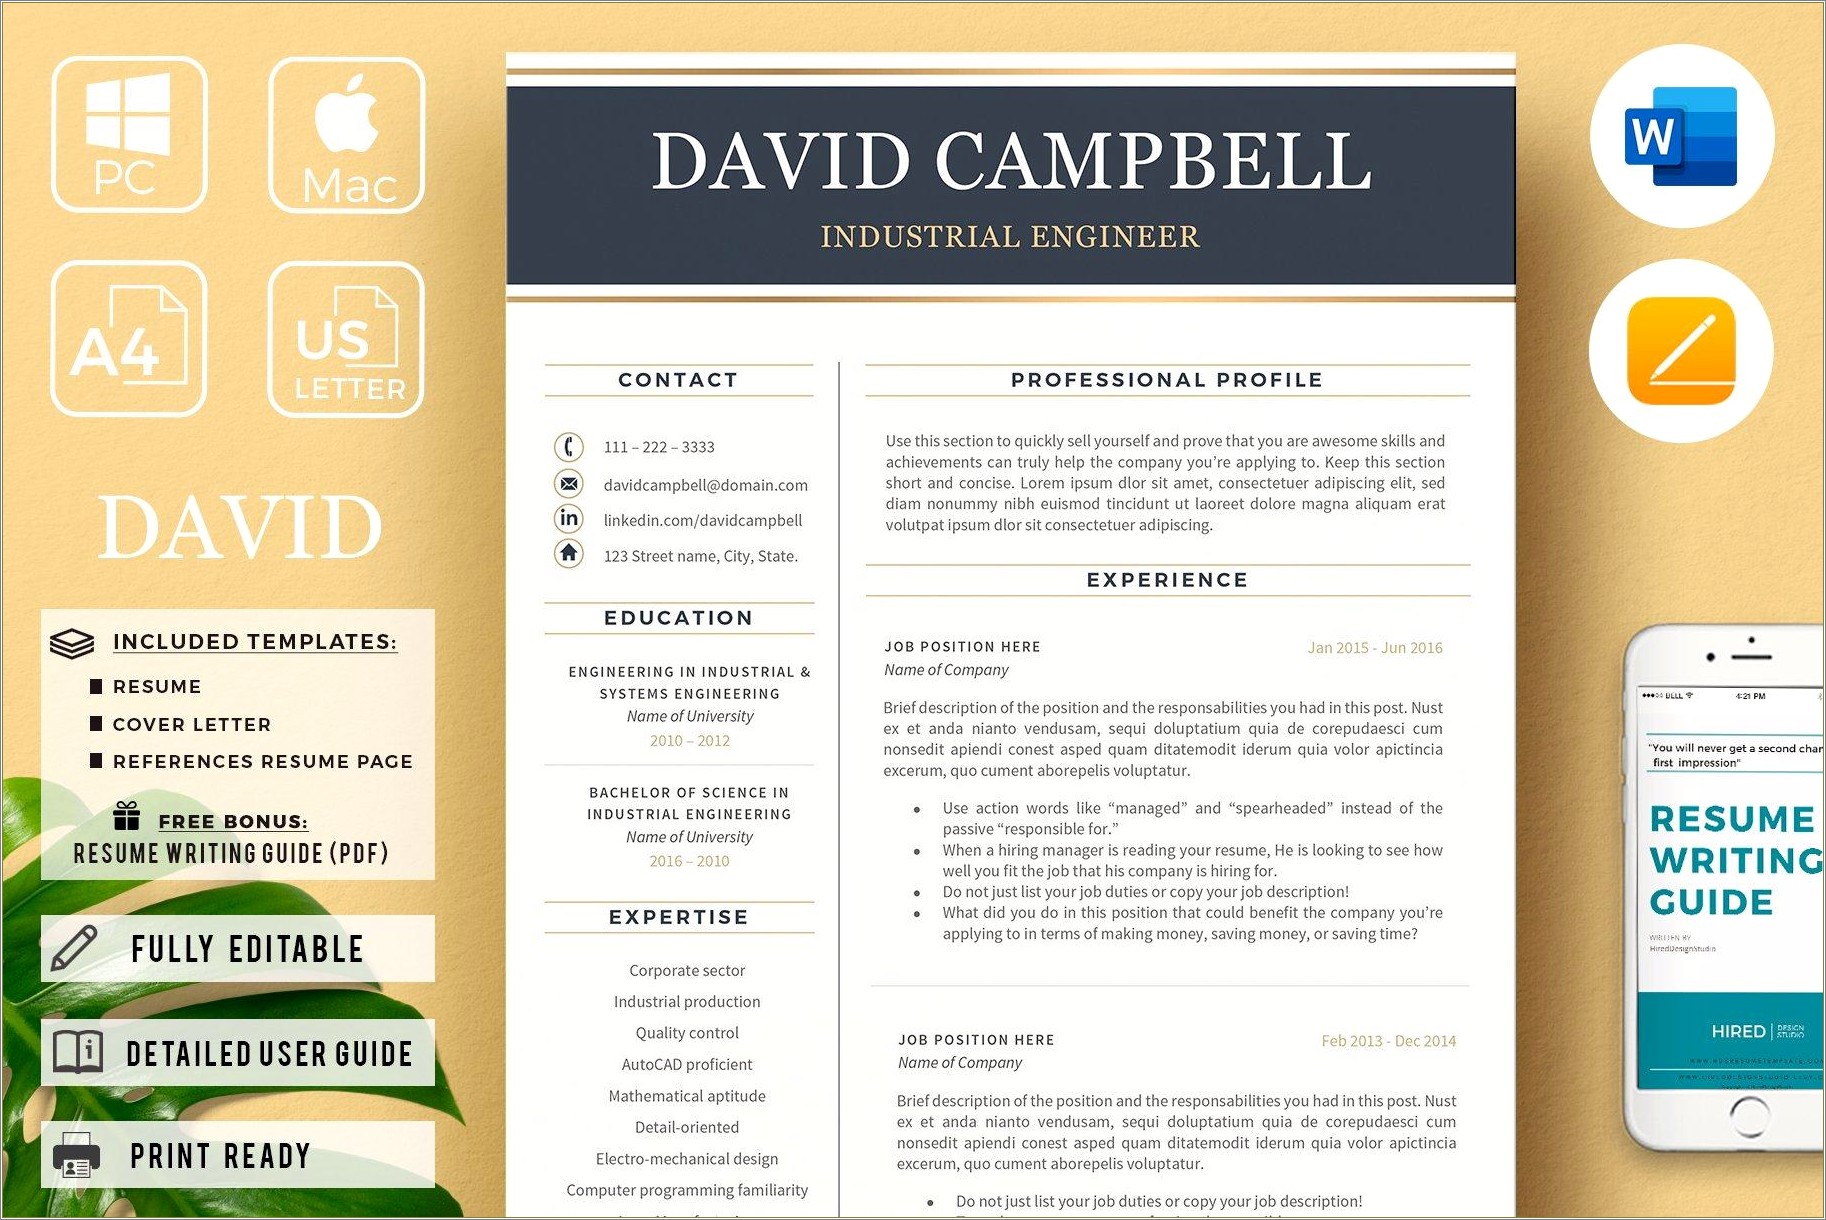 Resume Format Free Download For Engineers